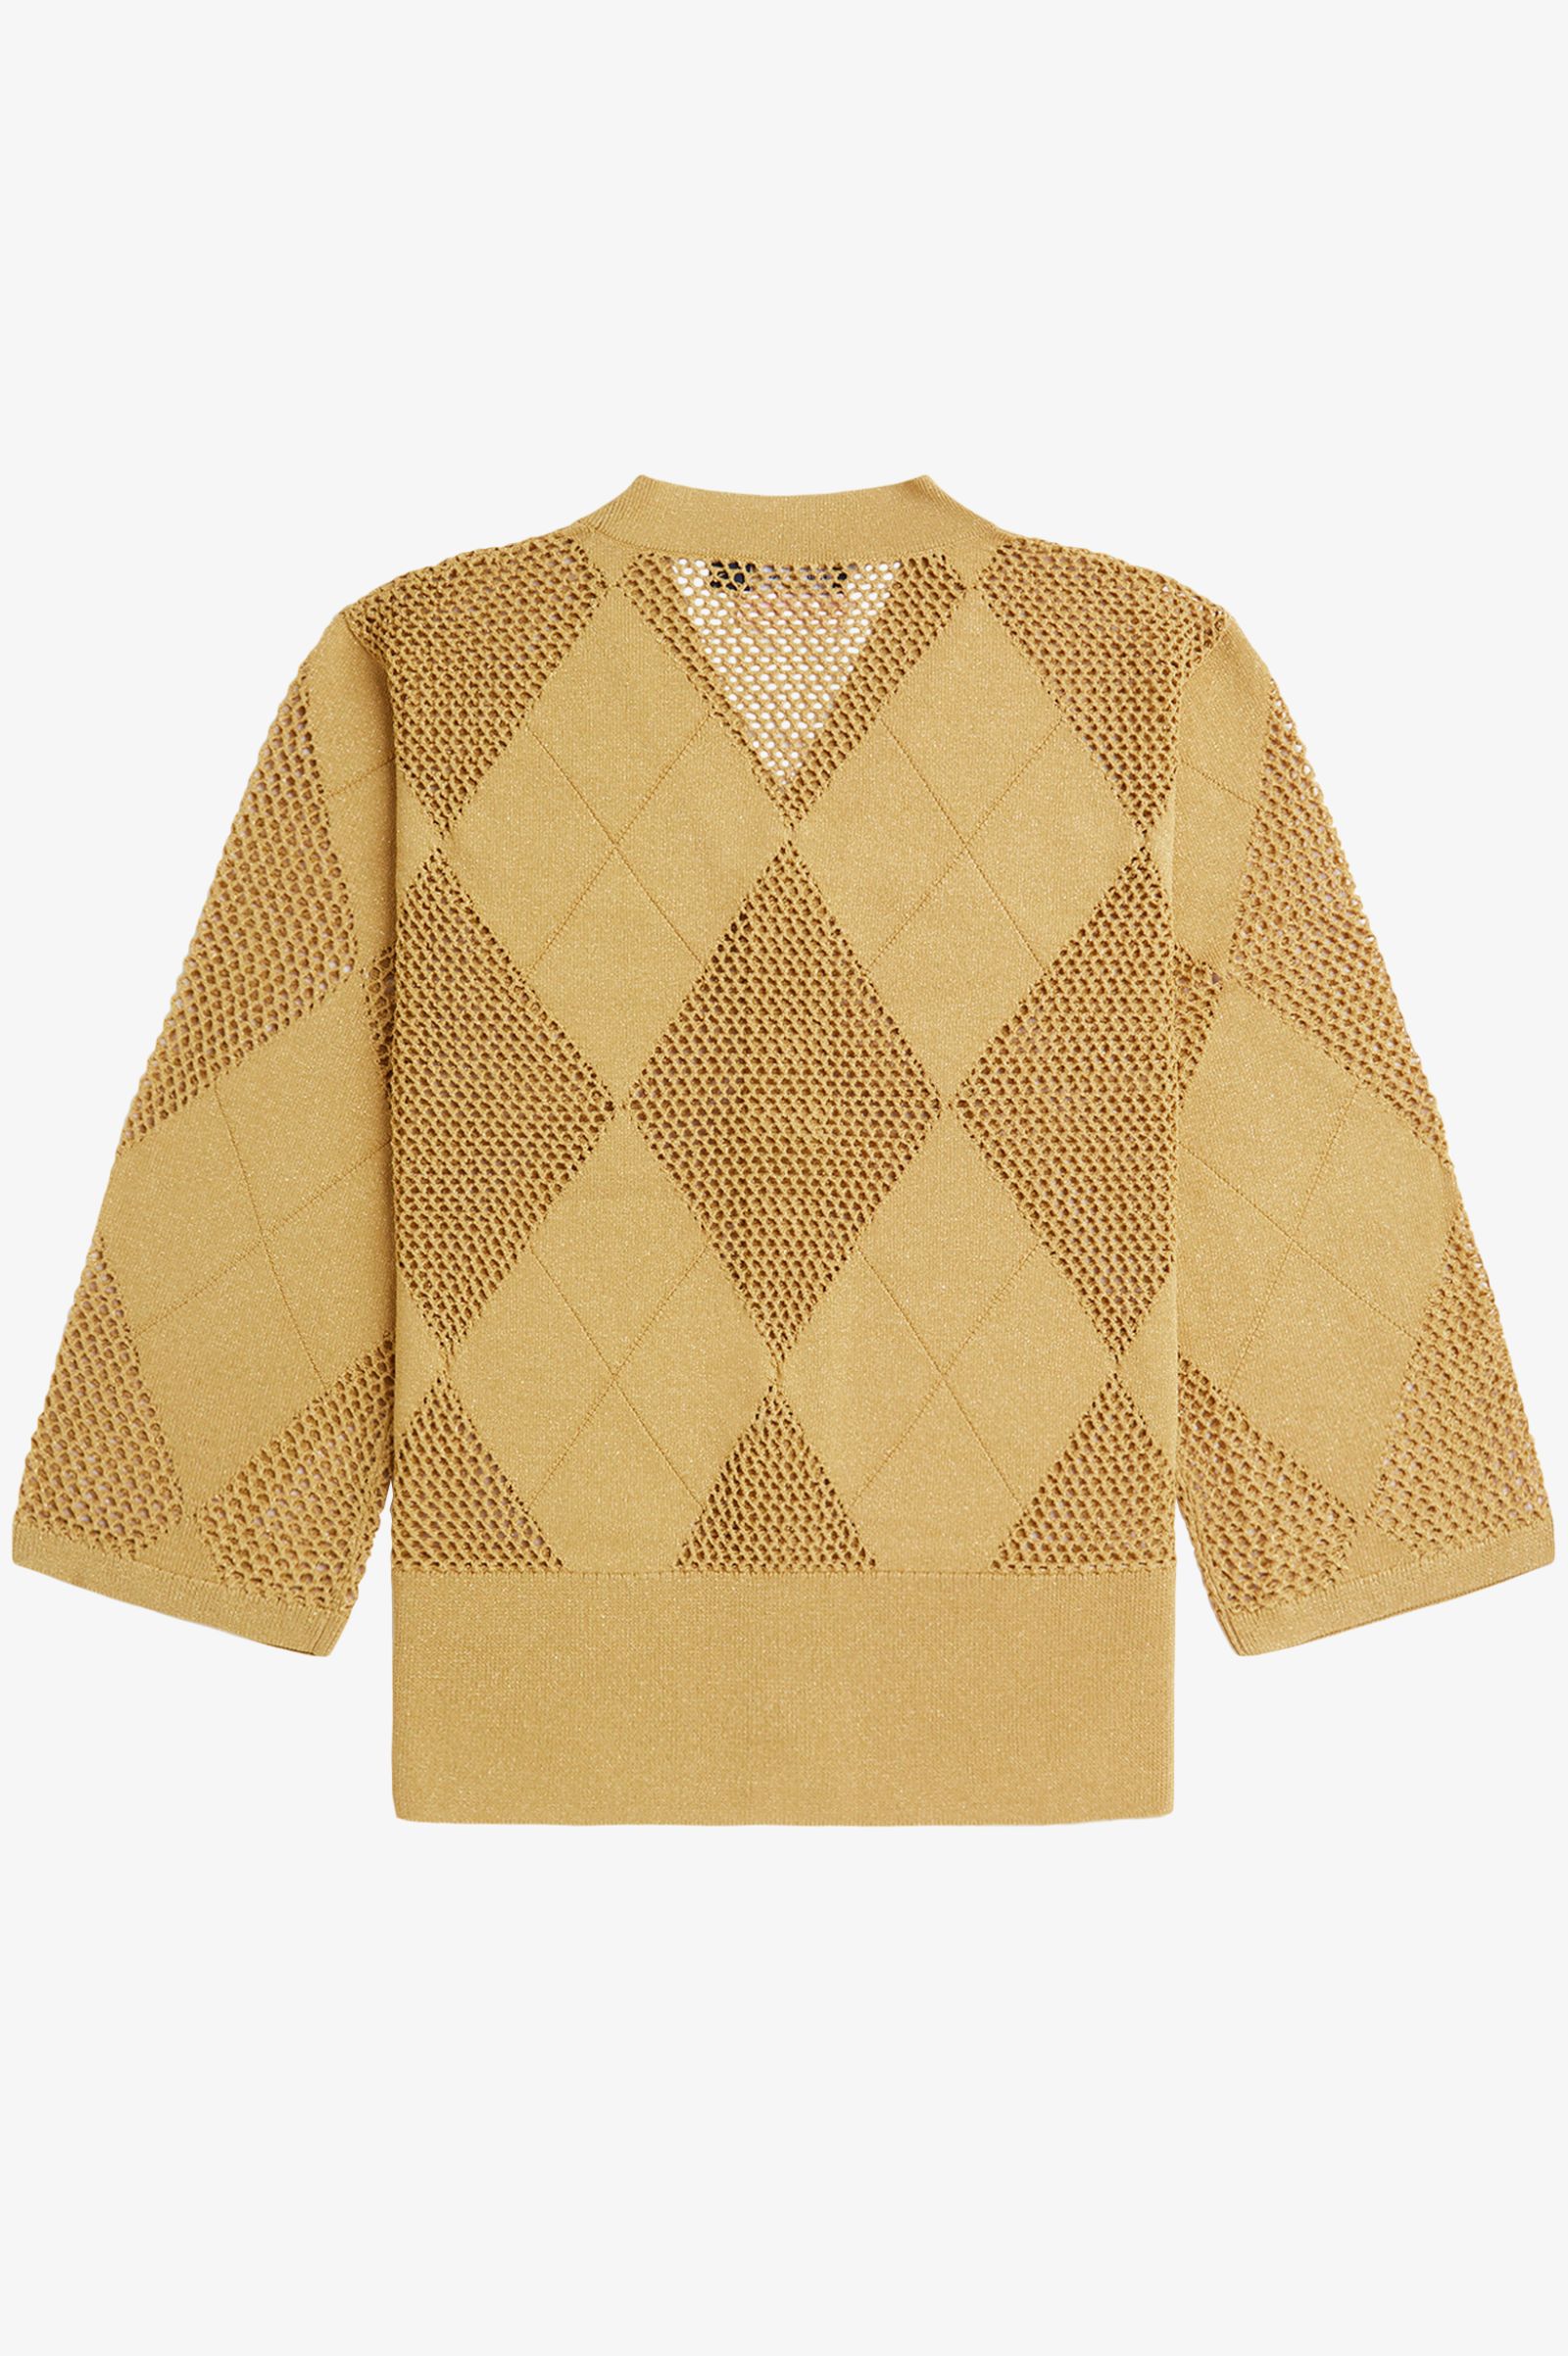 Fred Perry Argyle Knitted Cardigan in Gold